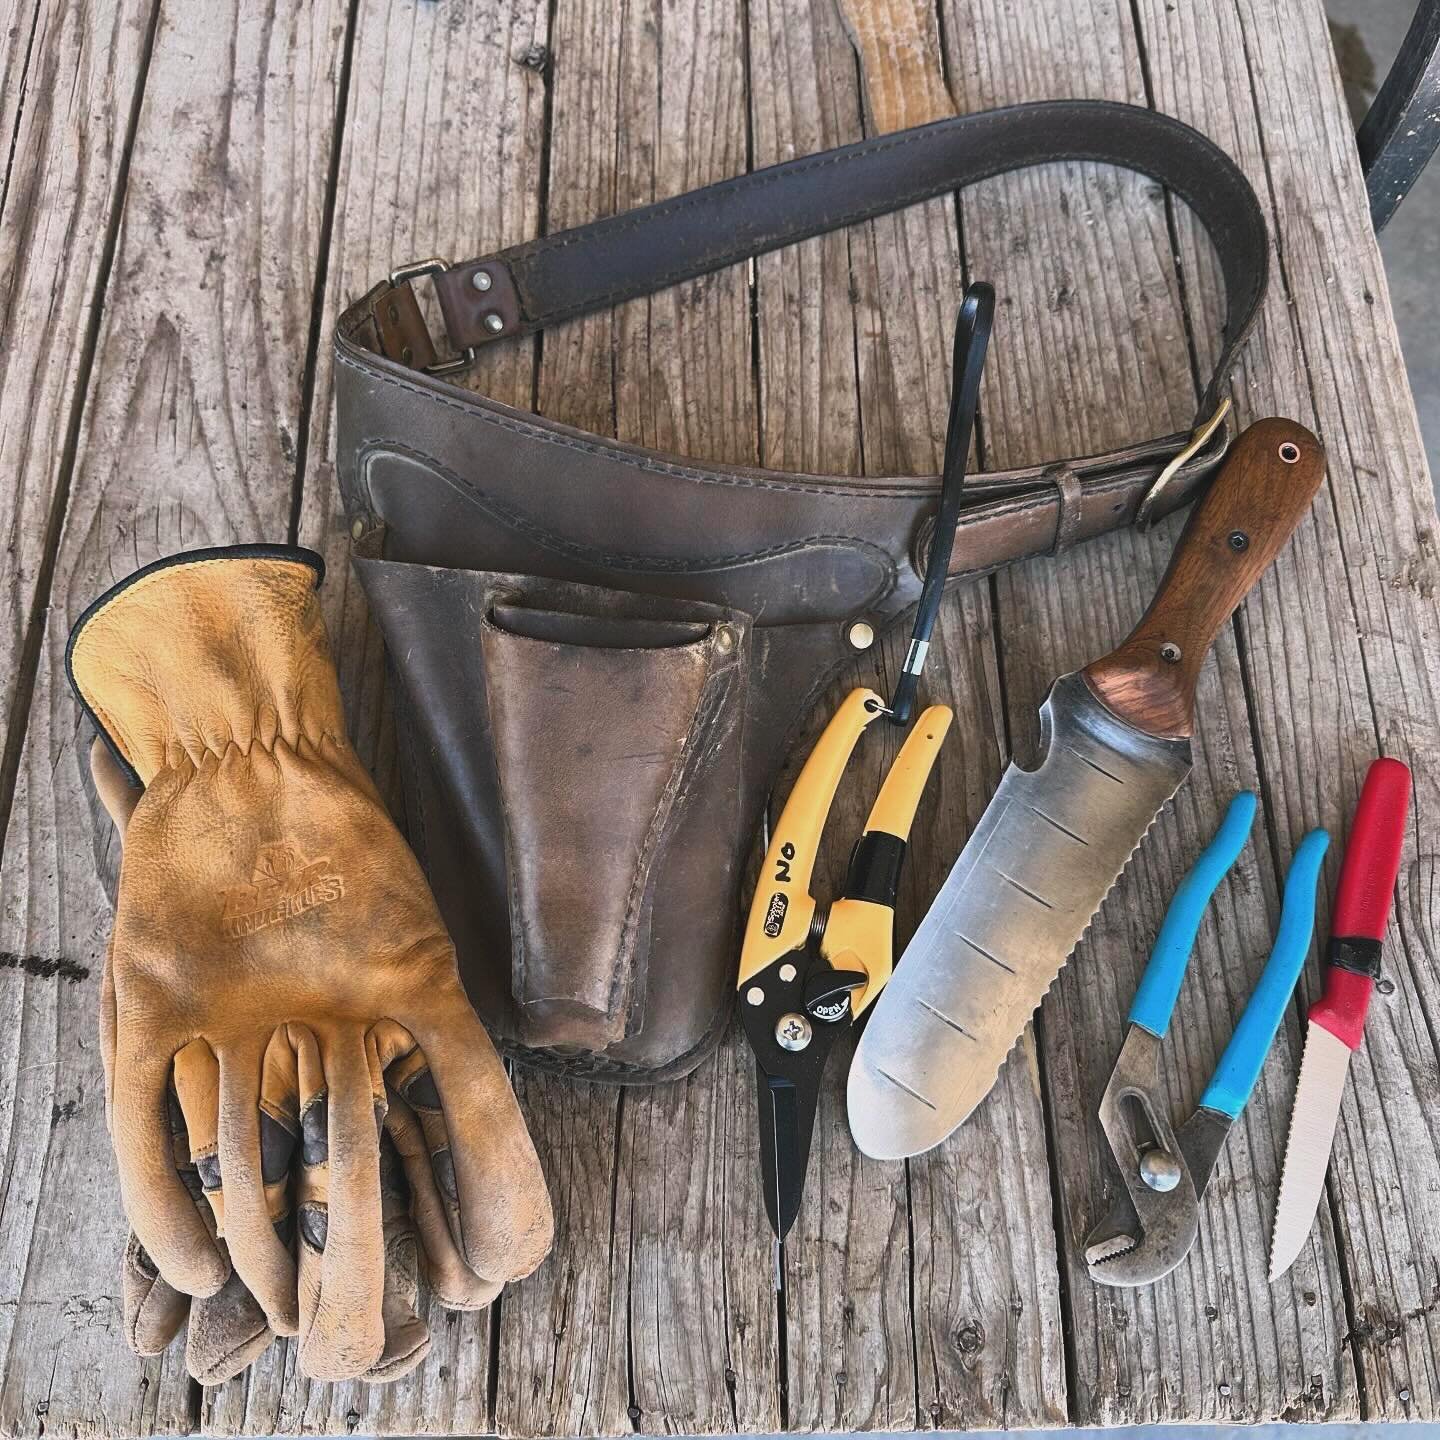 My essential tools for wandering the farm. What are yours?